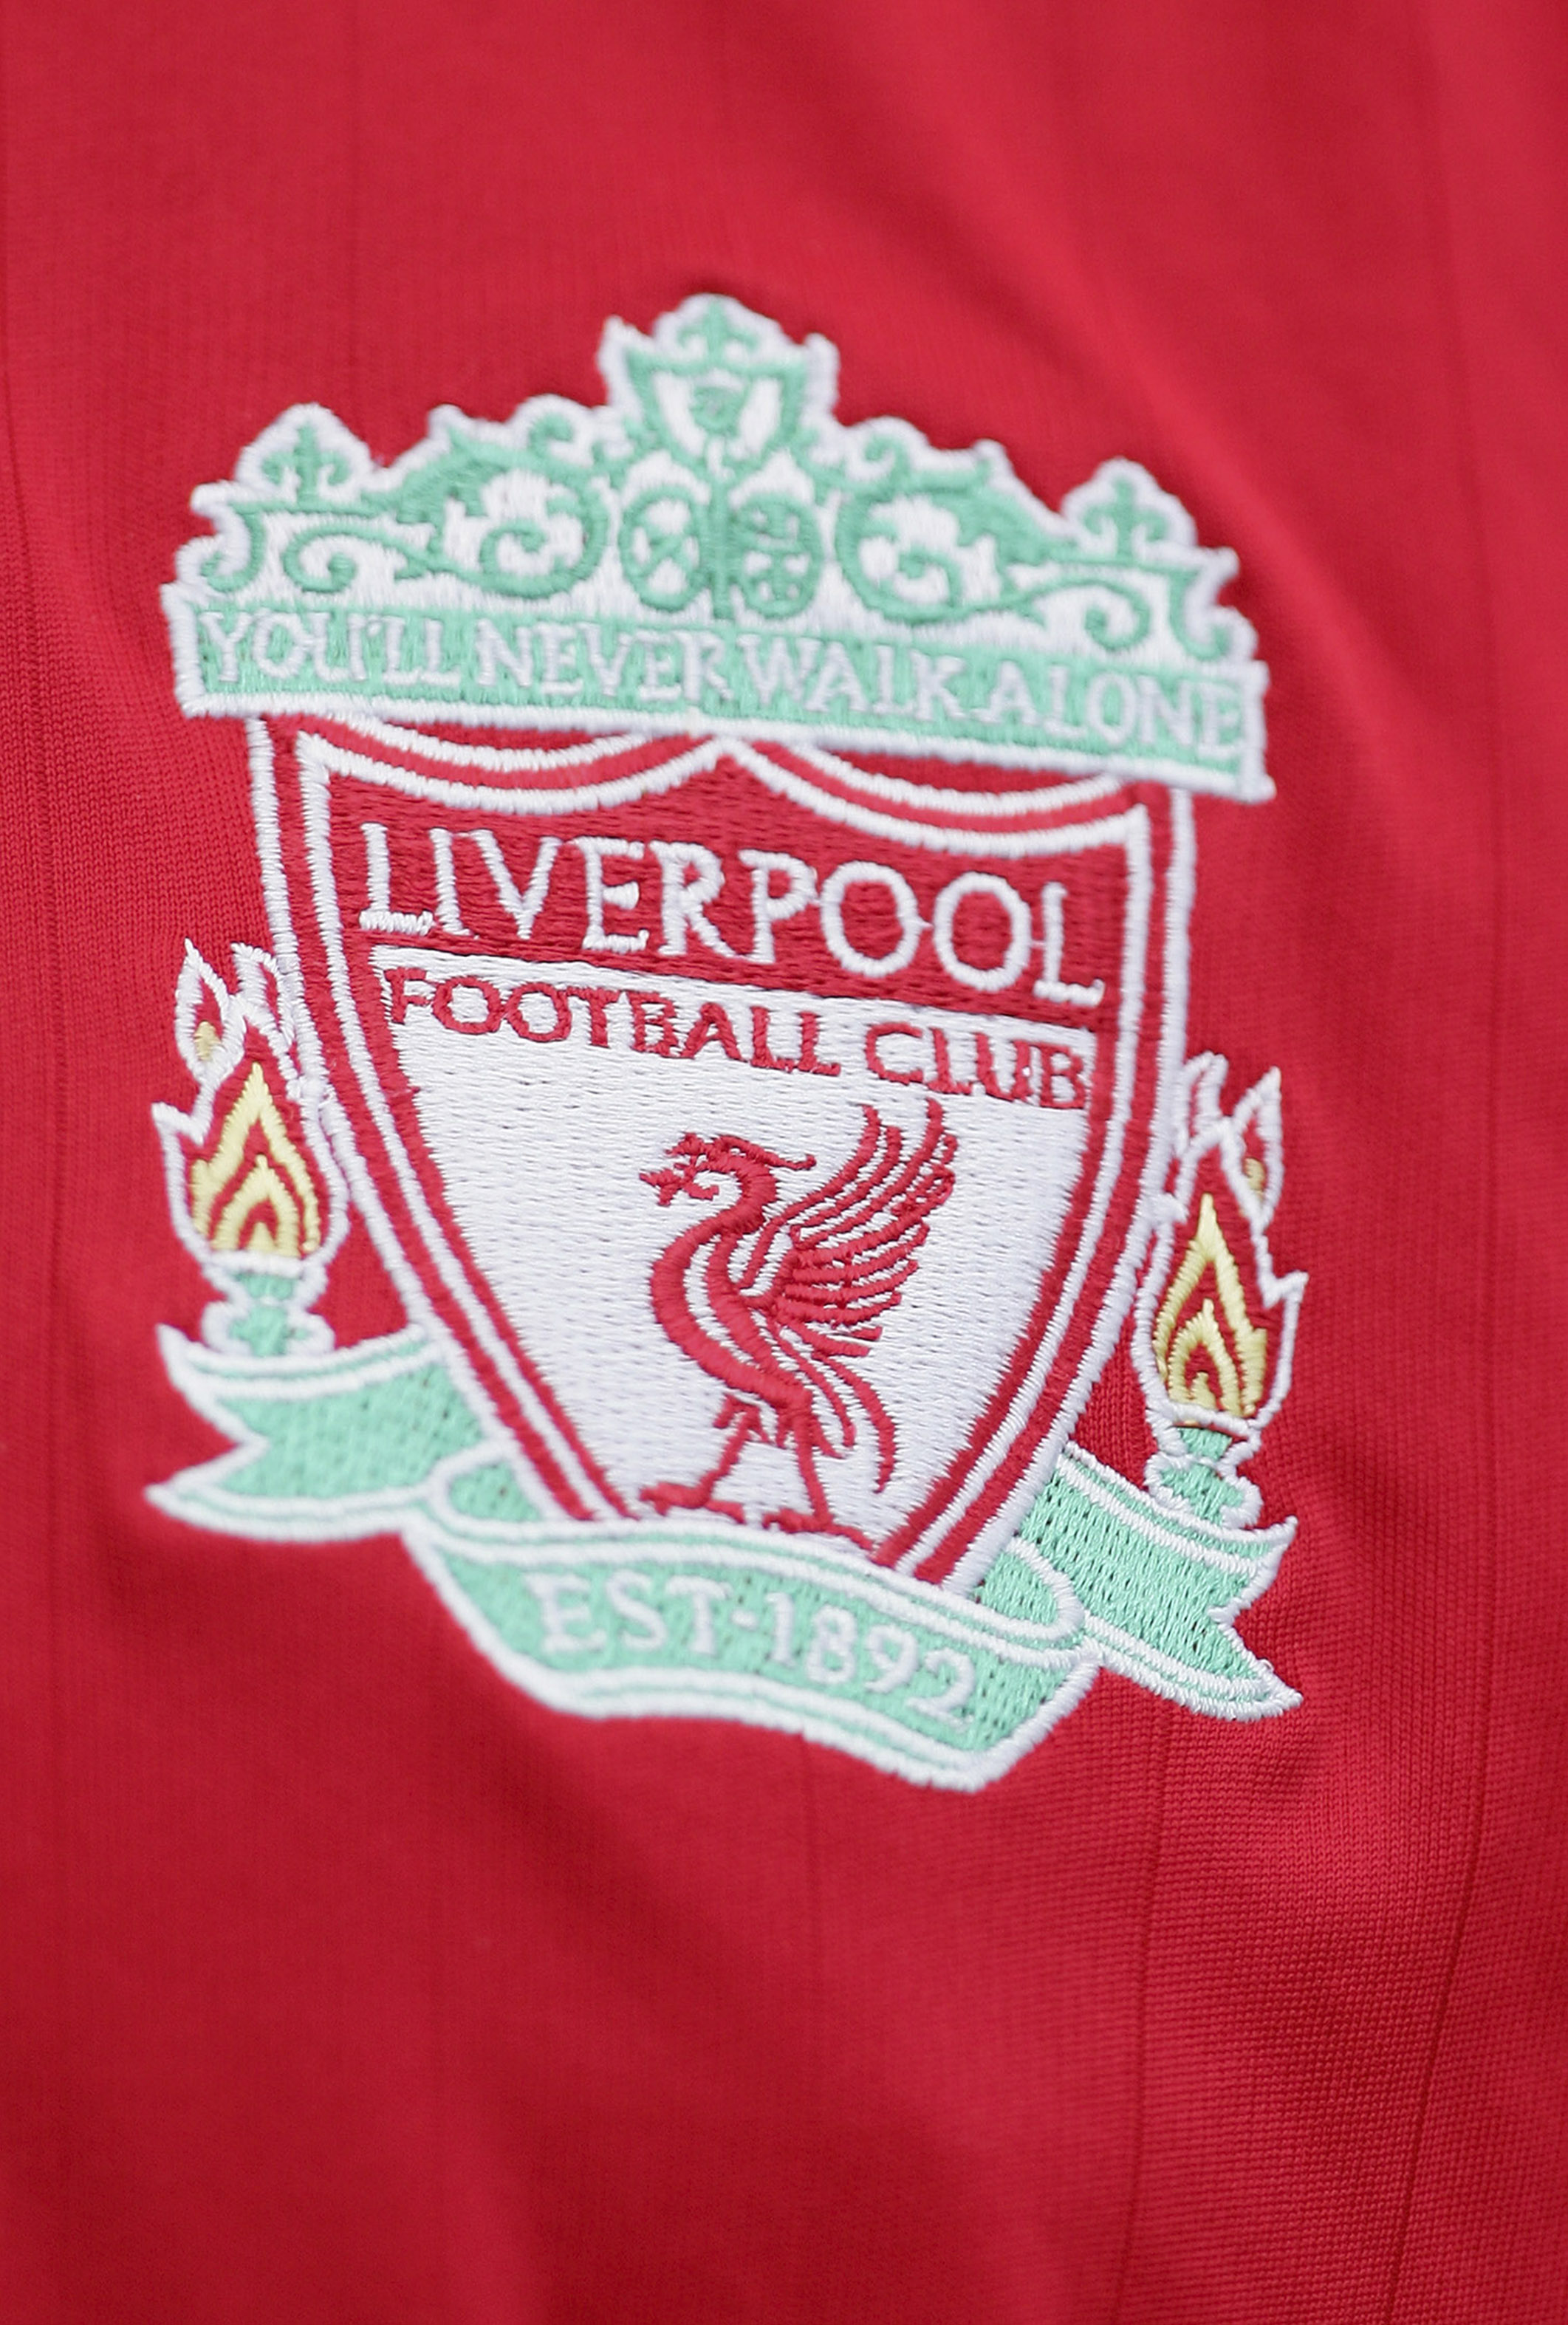 LIVERPOOL, UNITED KINGDOM - SEPTEMBER 23: The Liverpool badge on a fans shirt during the Barclays Premiership match between Liverpool and Tottenham Hotspur at Anfield on September 23, 2006 in Liverpool, England.  (Photo by Laurence Griffiths/Getty Images)